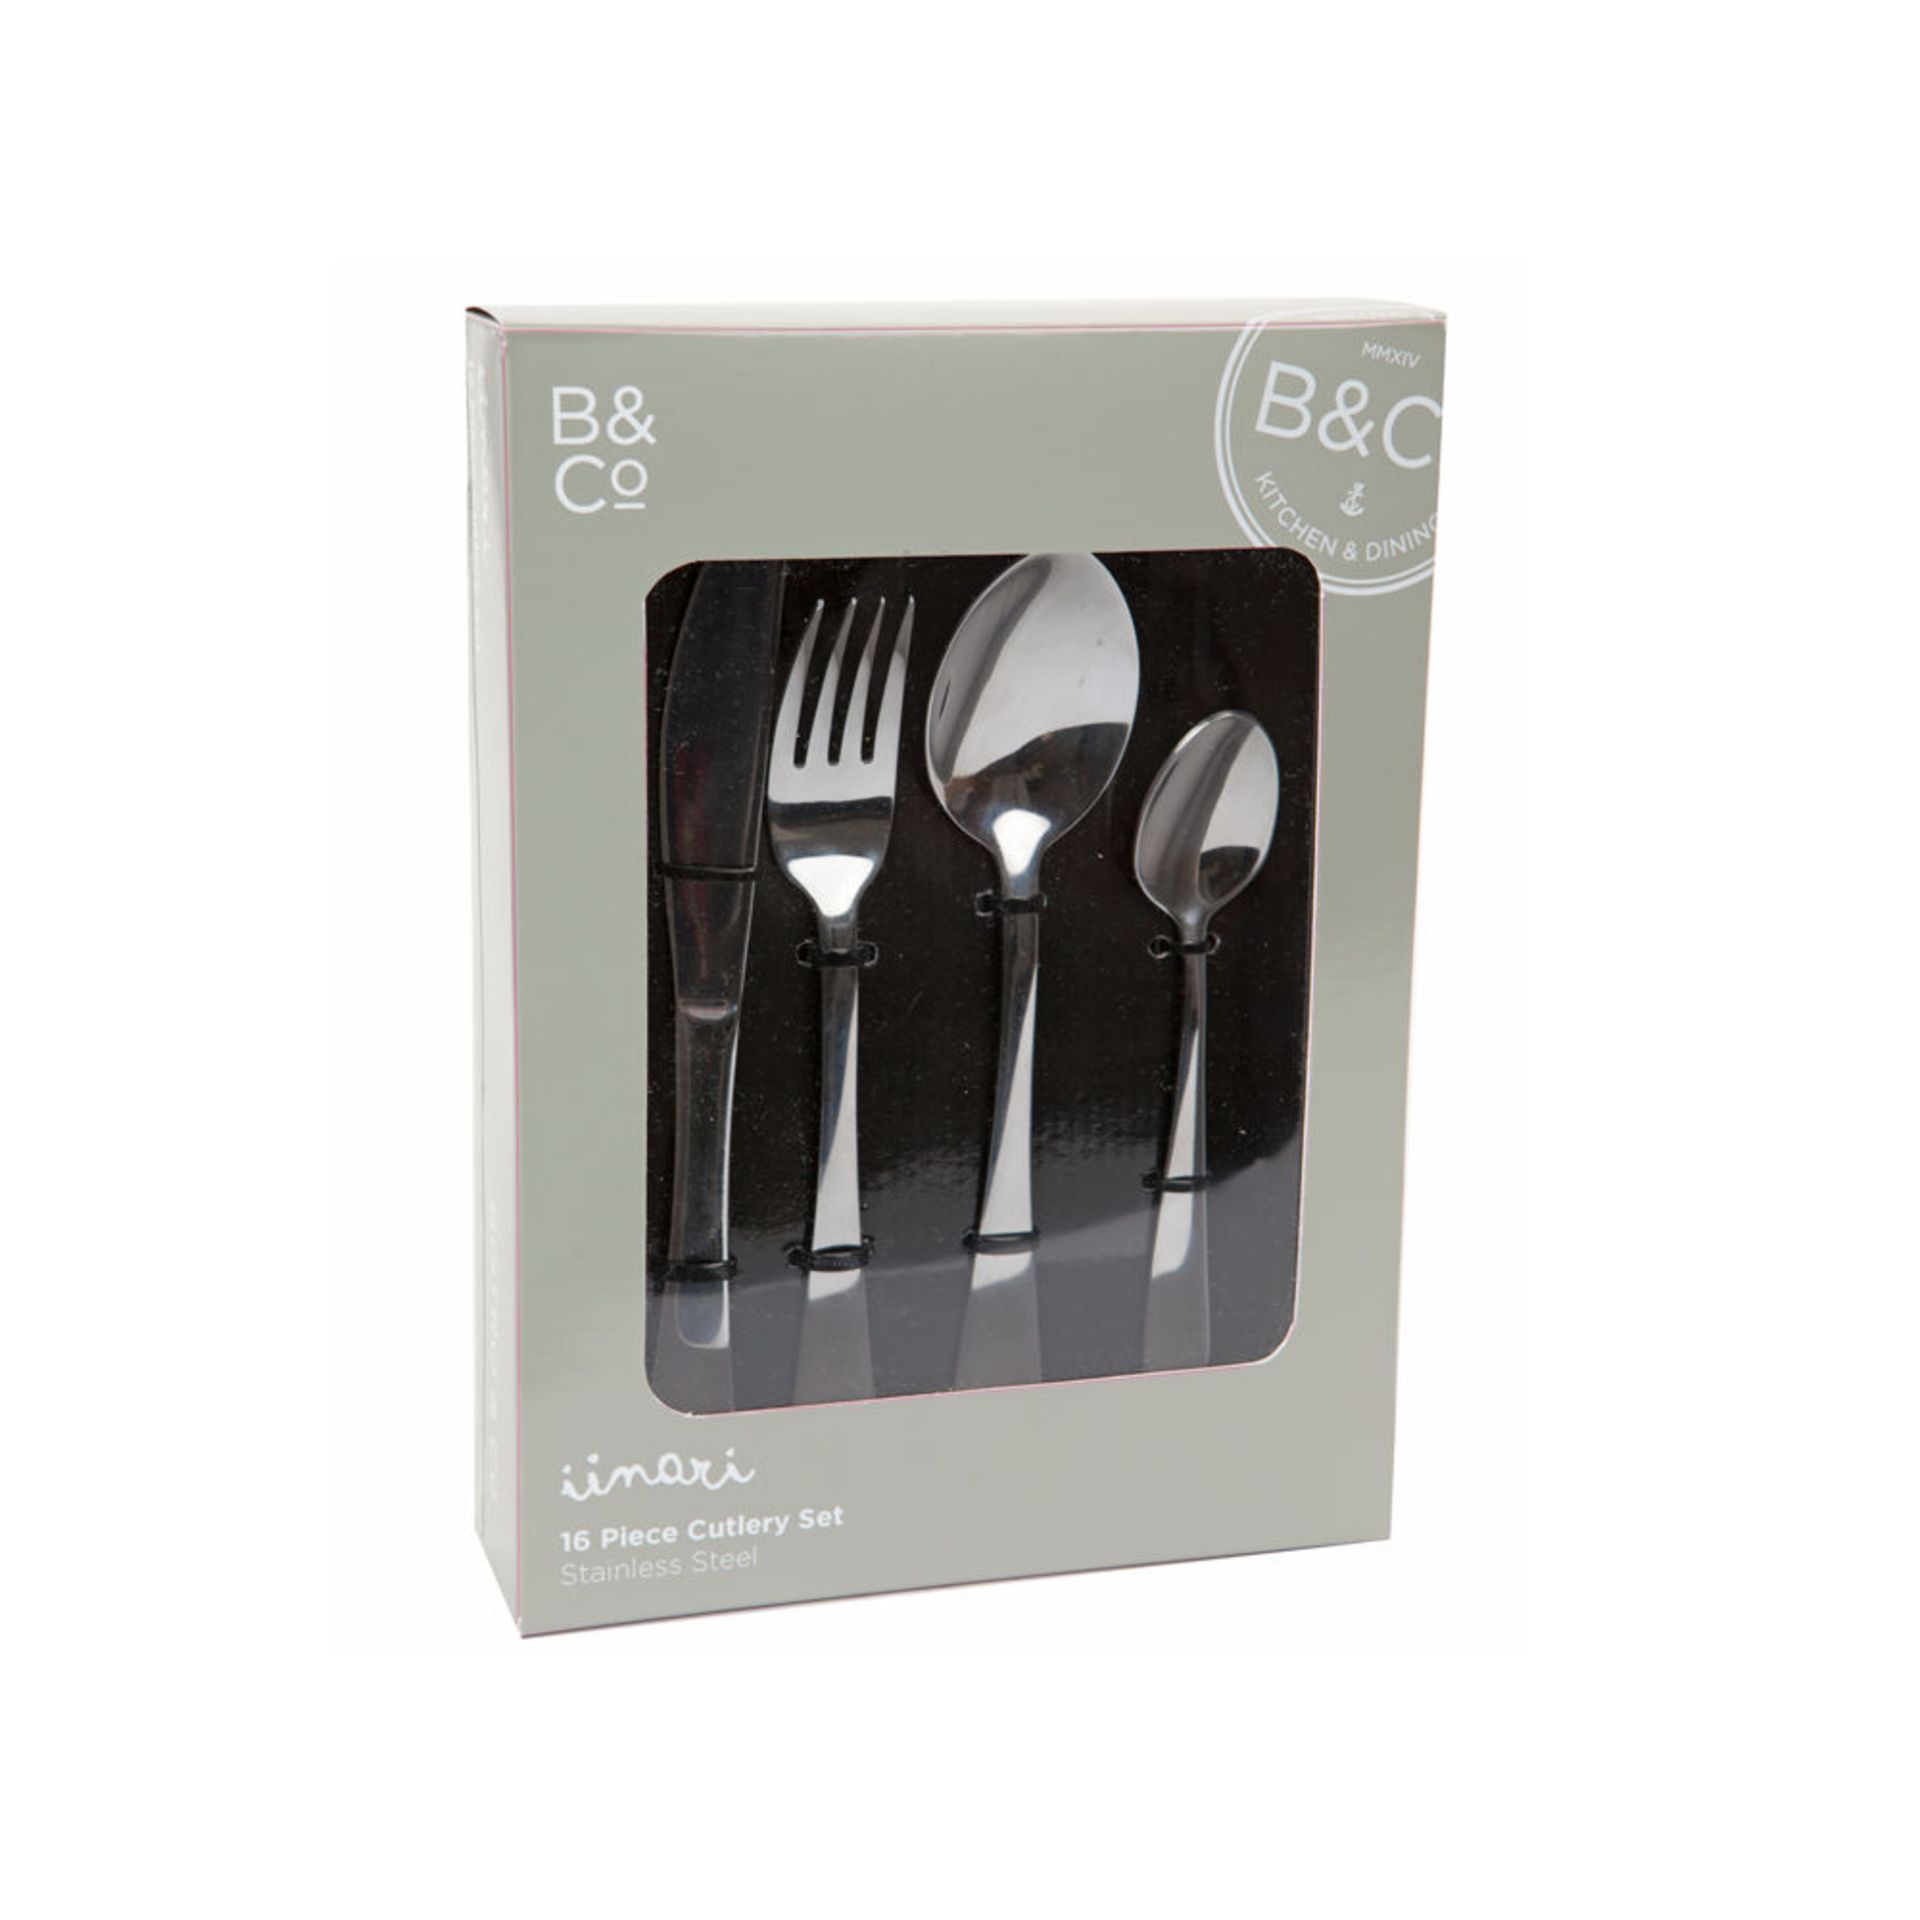 V Brand New Bistro & Co Linari 16 Piece Stainless Steel Cutlery Set X 2 YOUR BID PRICE TO BE